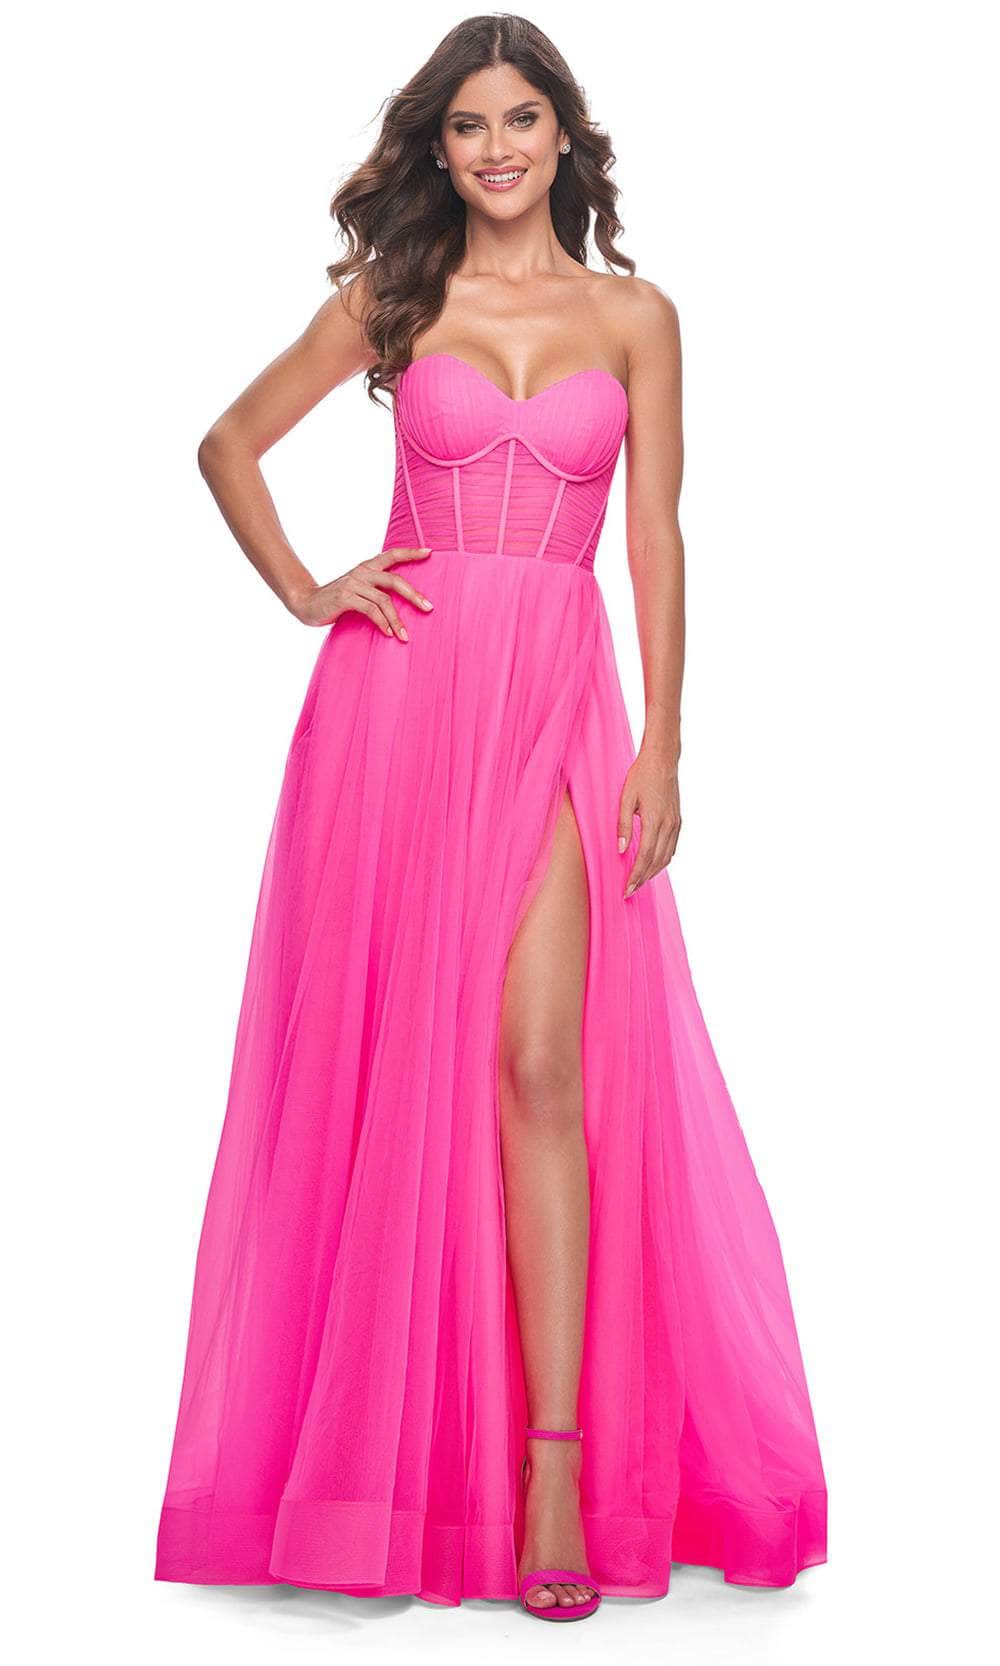 Image of La Femme 32341 - Sweetheart Neck Exposed Boned Prom Gown